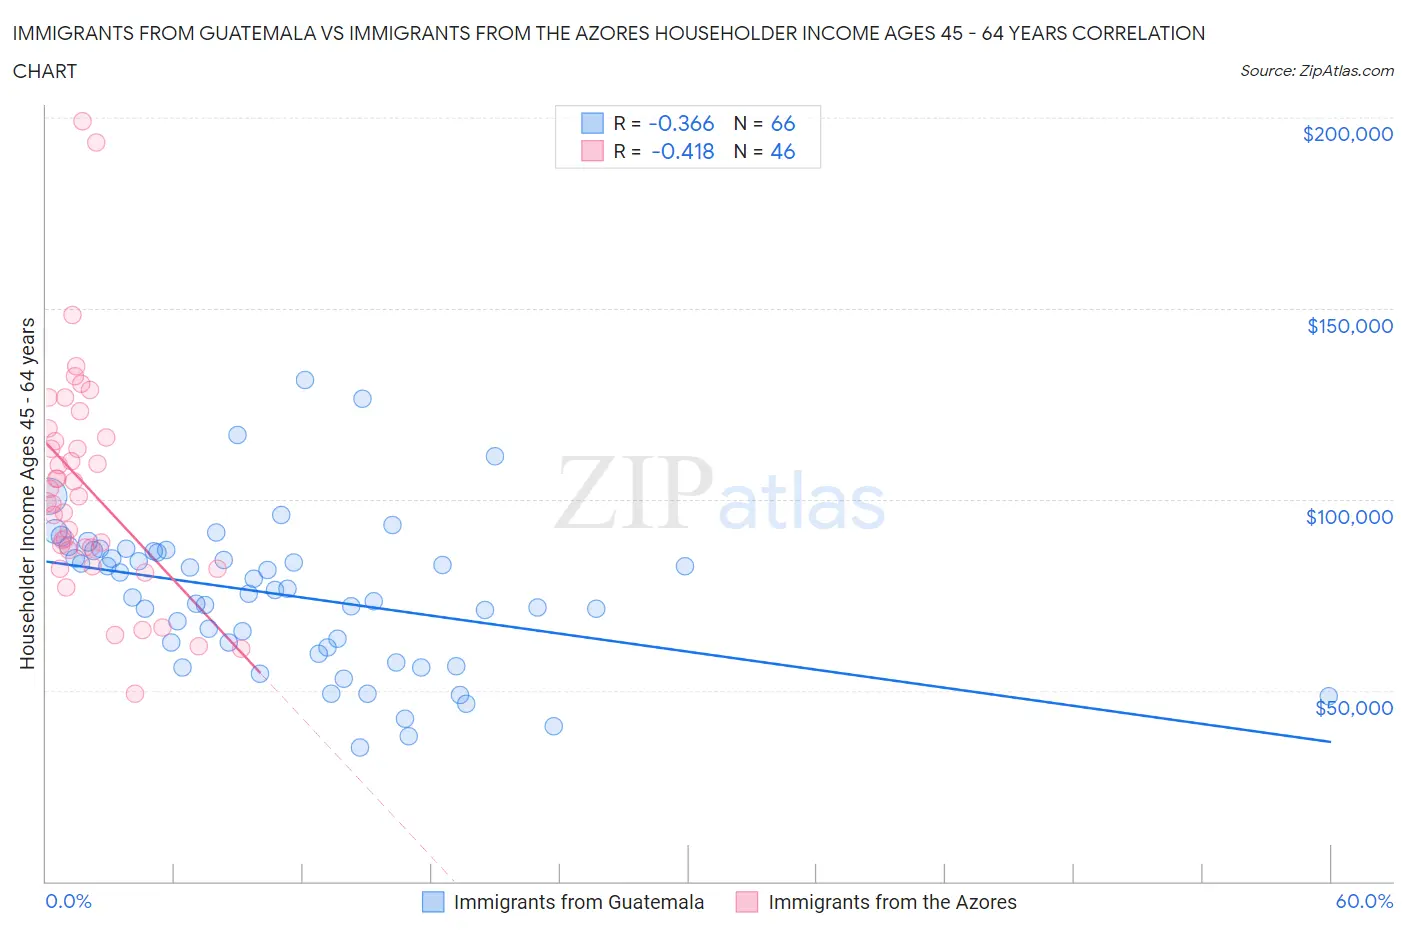 Immigrants from Guatemala vs Immigrants from the Azores Householder Income Ages 45 - 64 years